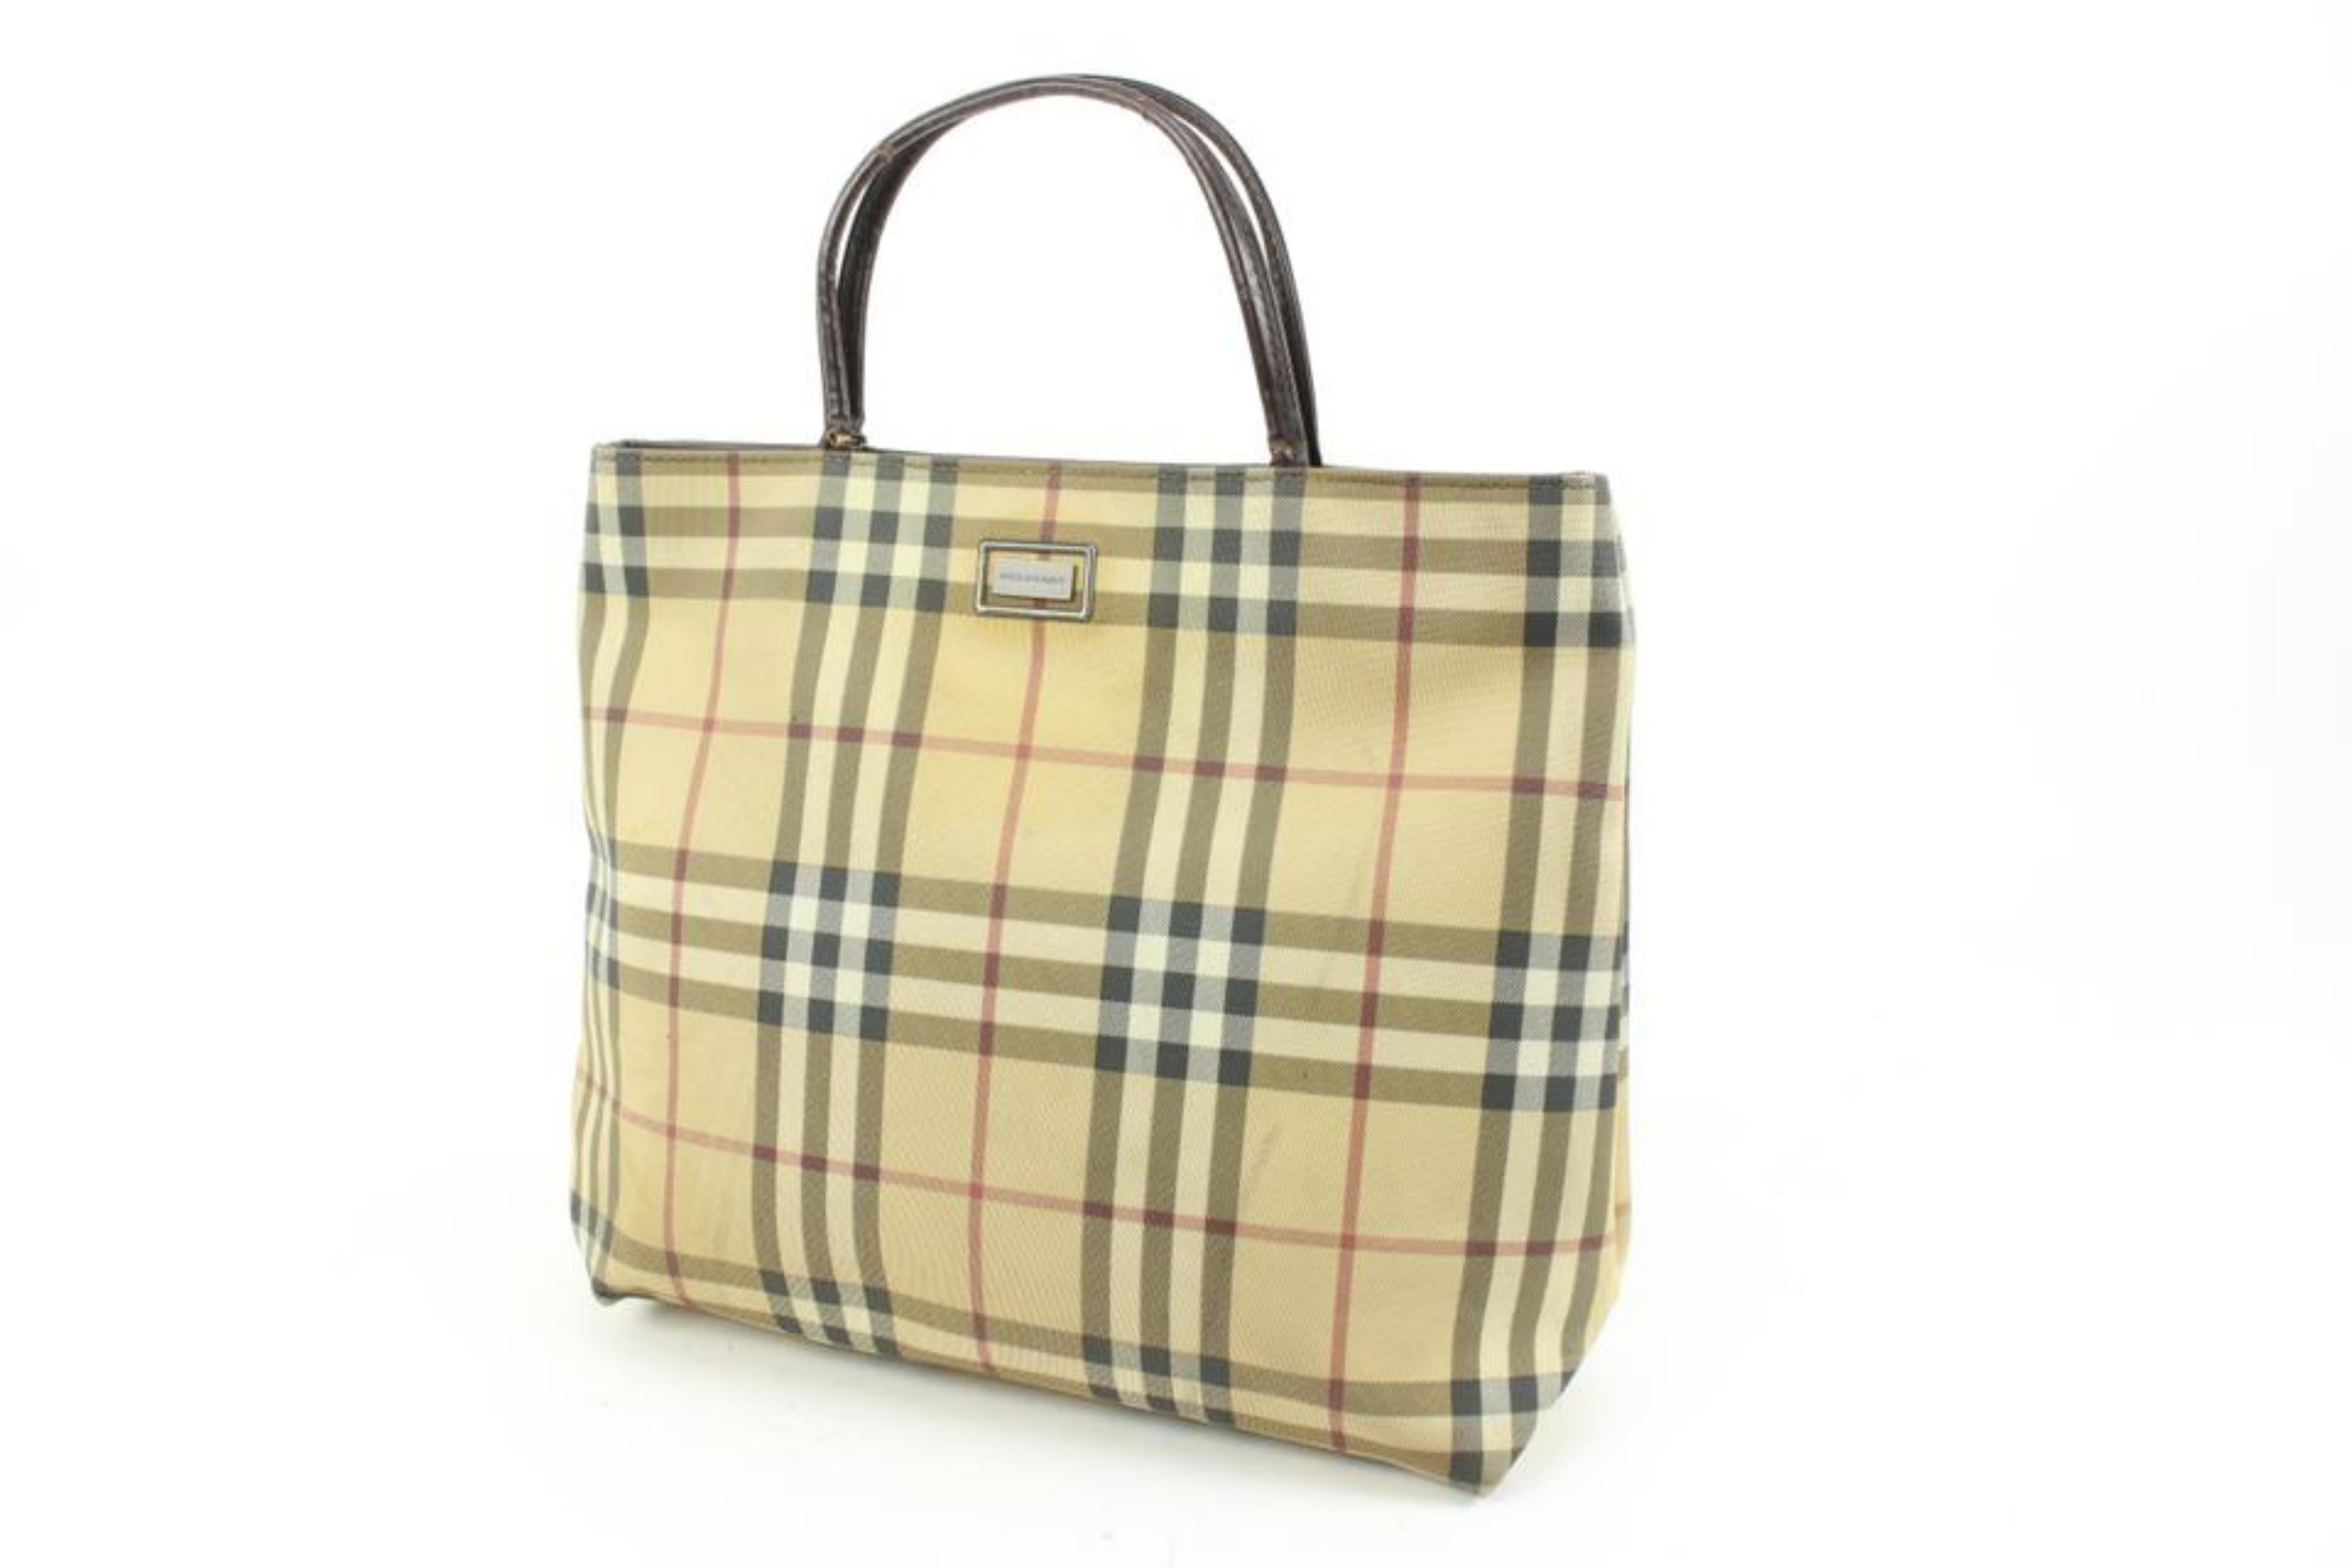 Burberry London Beige Nova Check Coated Canvas Tote Bag Upcycle Ready 9b419s
Made In: Italy
Measurements: Length:  13.5